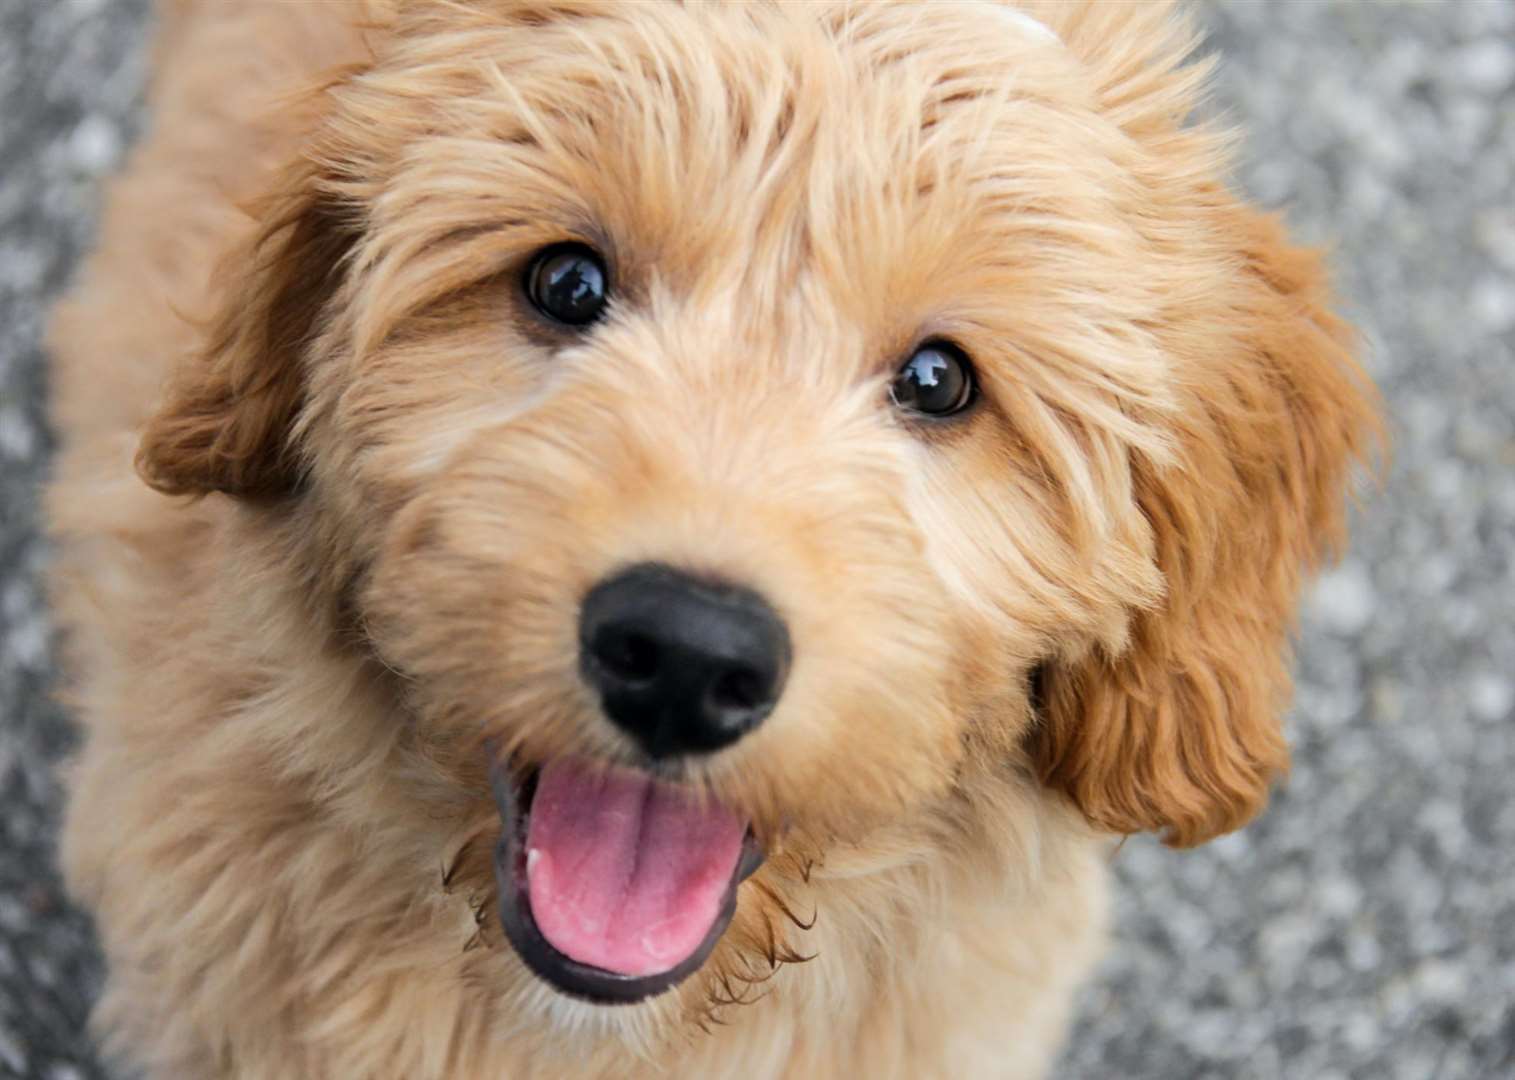 The goldendoodle received the most views per puppy advert. Image: iStock.